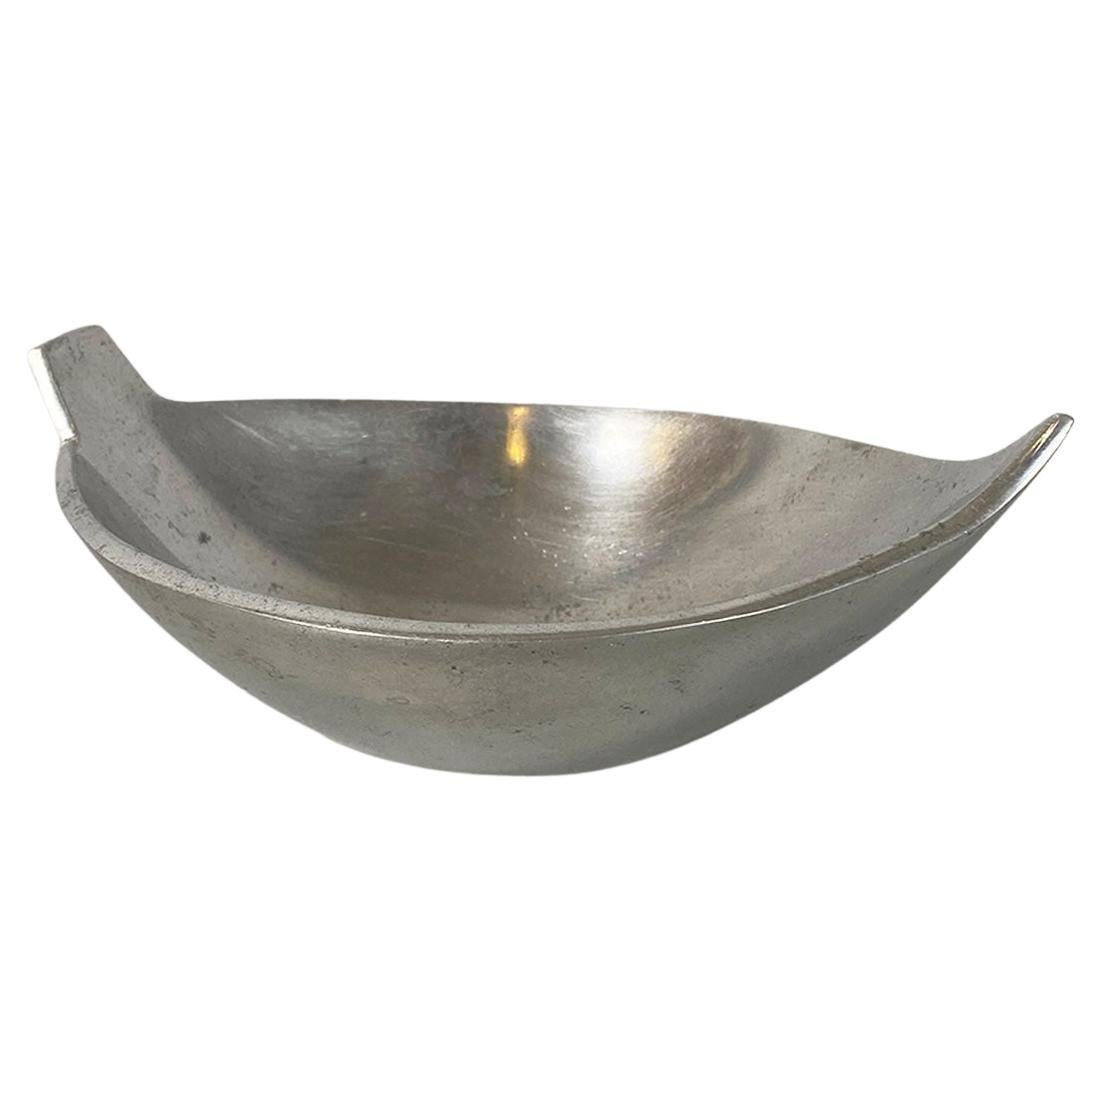 Italian modern metal irregular bowl or container cup by La Rinascente, 1990s